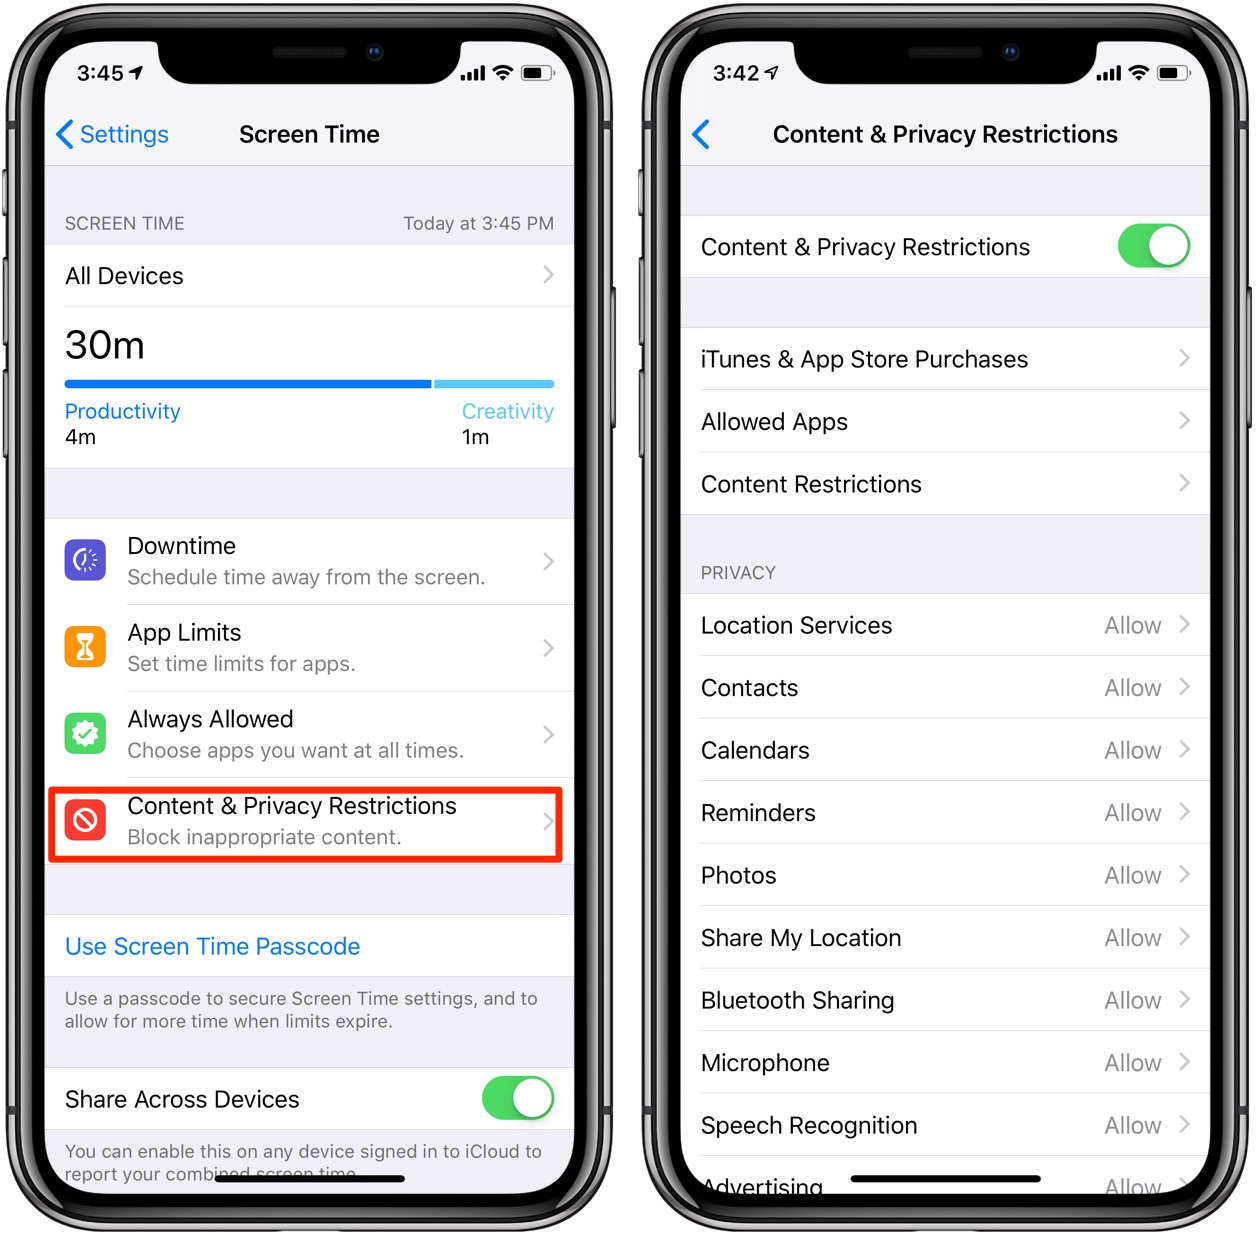 How to access iPhone and iPad Restrictions & Parental Controls on iOS 12